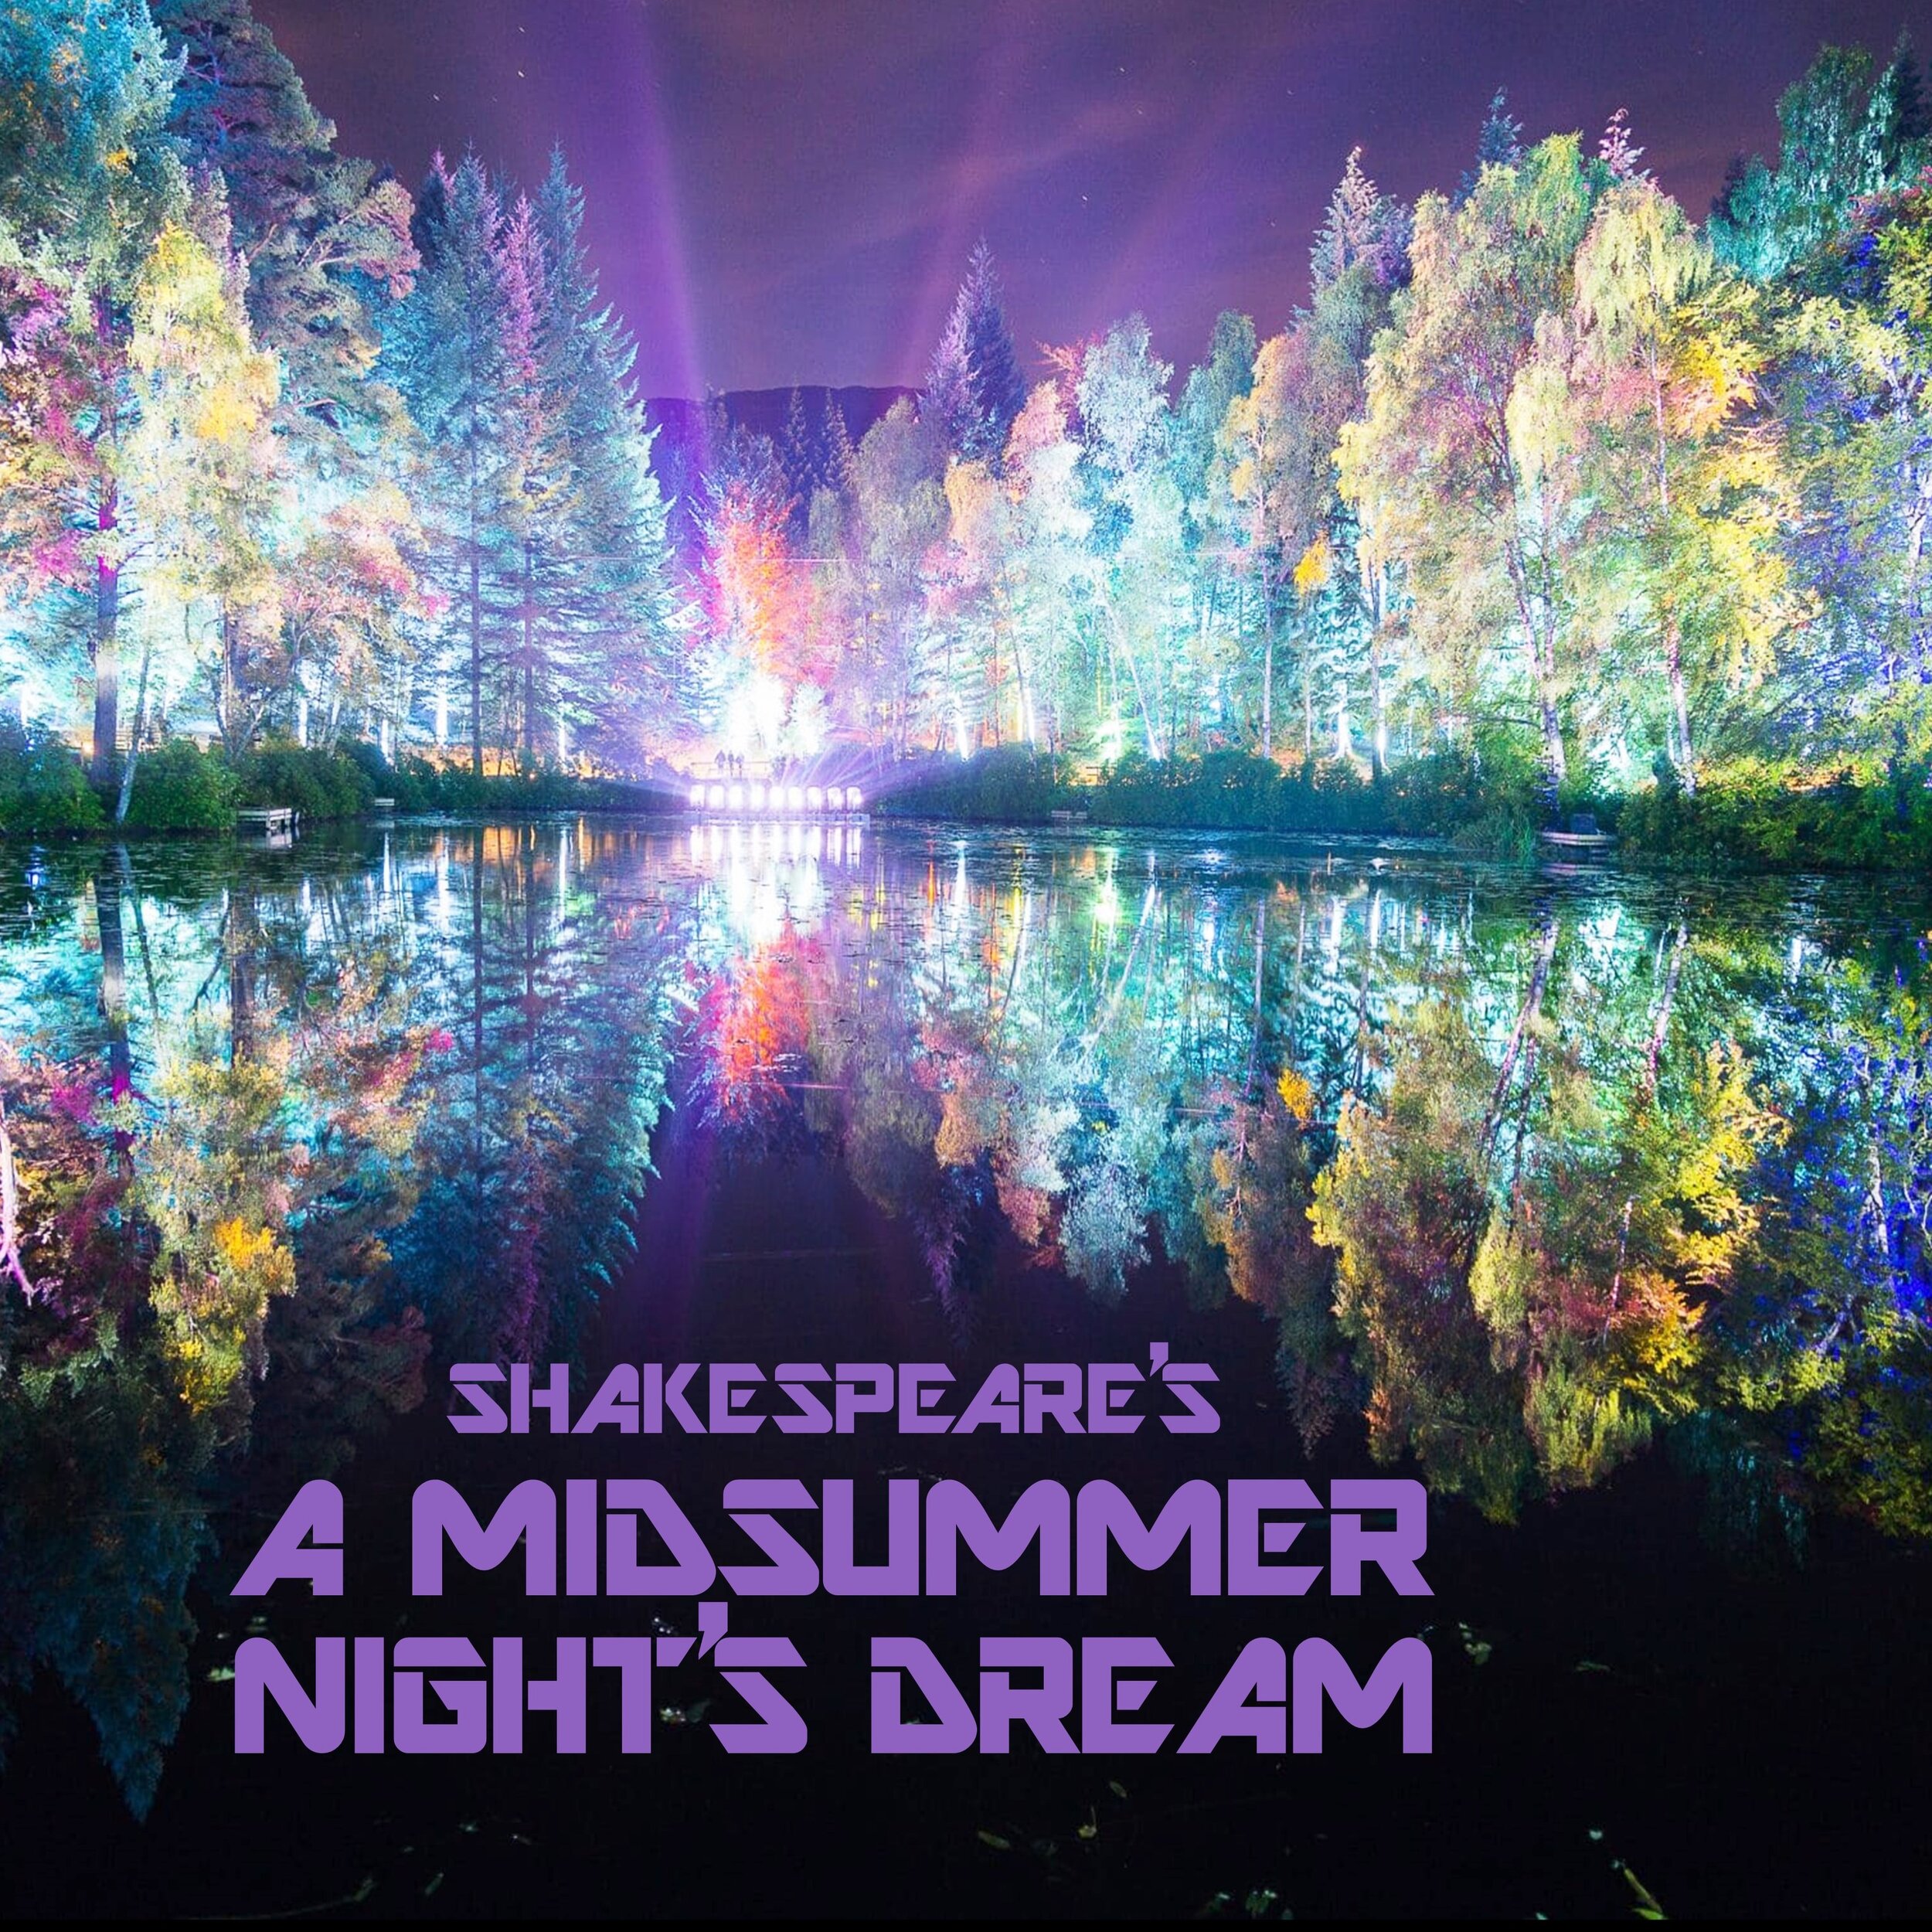 A Midsummer Night's Dream - Audition Date Sunday 6th June 2021, 4pm (slots to be allocated)